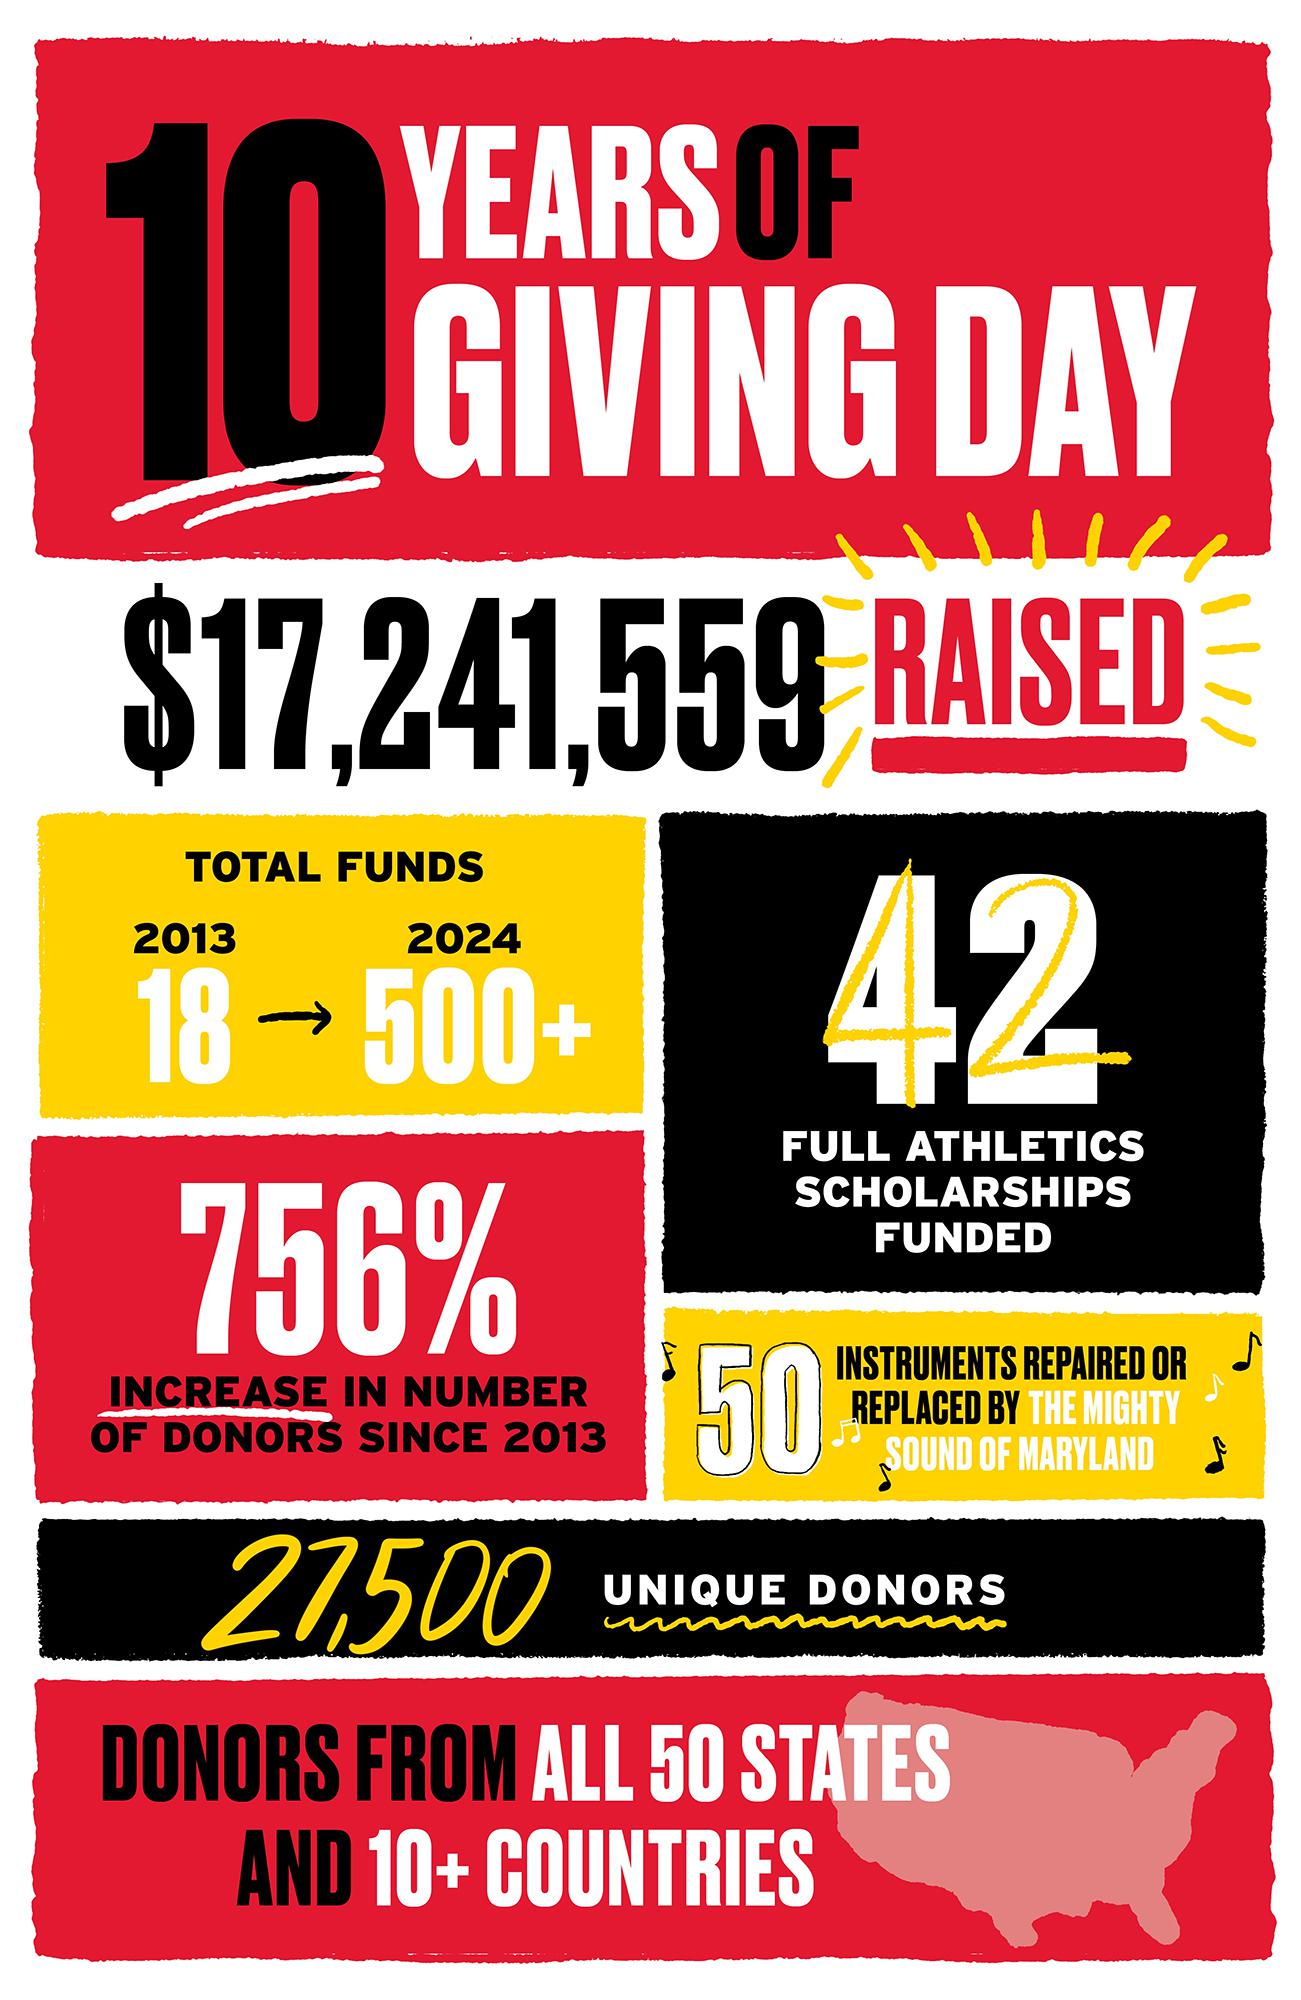 10 years of Giving Day: $17,241,559 raised. Total funds: 18 in 2013, 500+ in 2024. 42 full athletics scholarships funded. 756% increase in number of donors since 2013. 50 instruments repaired or replaced by the Mighty Sound of Maryland. 27,500 unique donors. Donors from all 50 states and 10+ countries